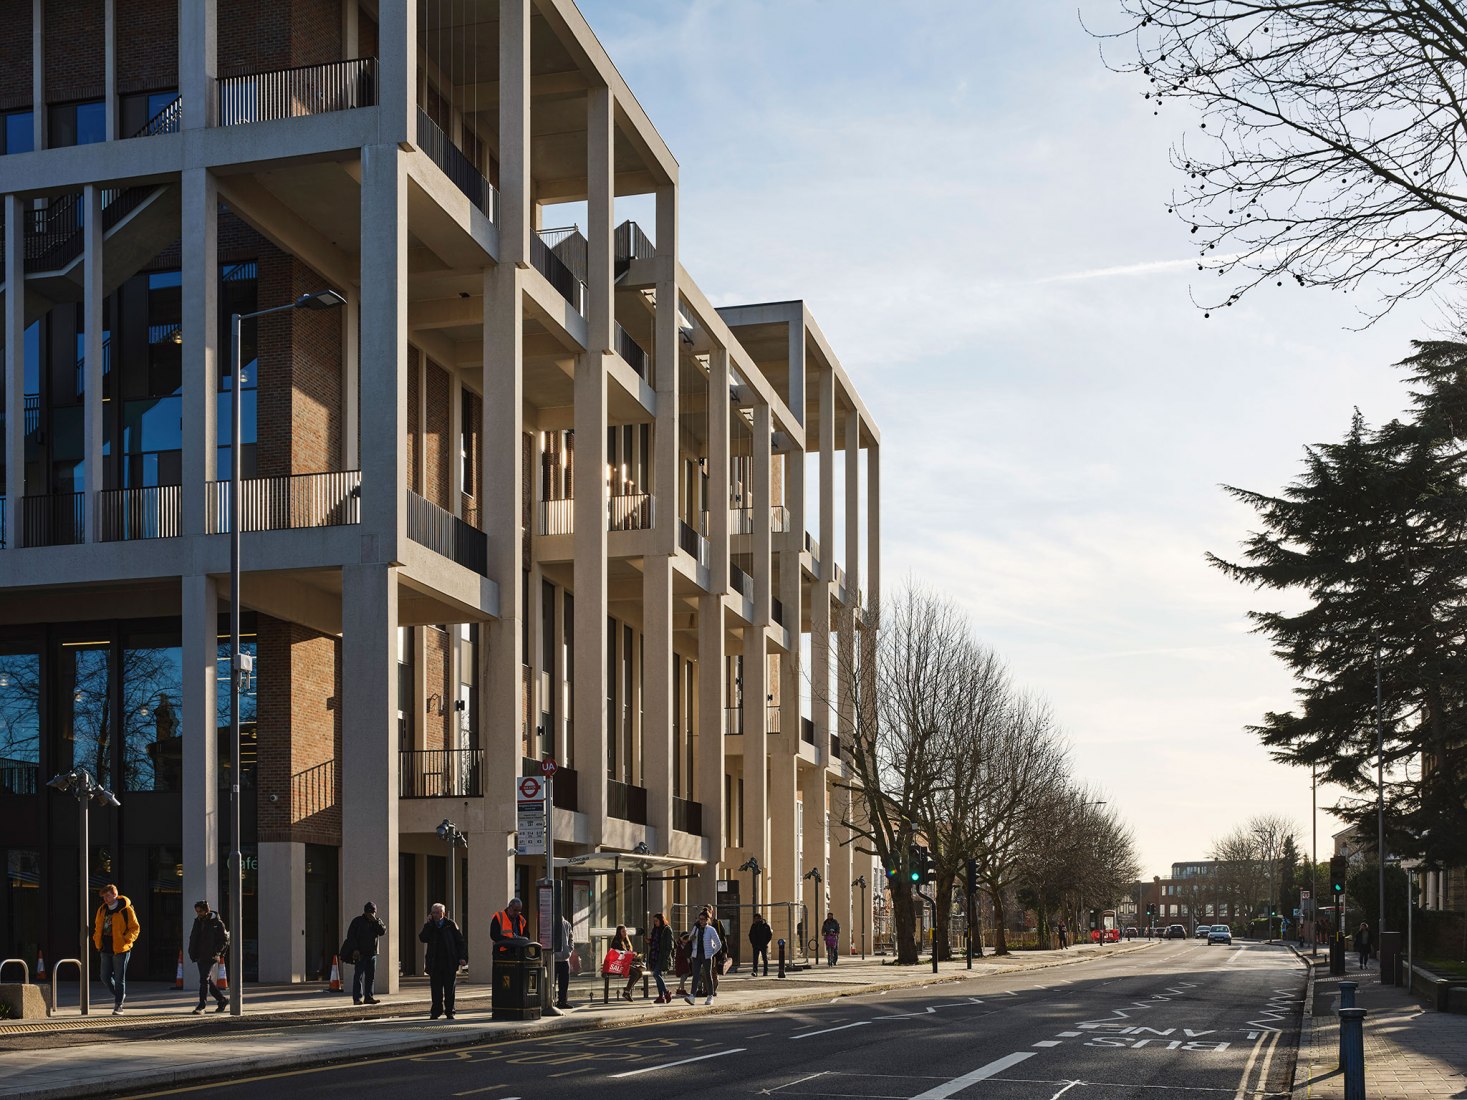 Town House at Kingston University by Grafton Architects. Photograph by Dennis Gilbert.